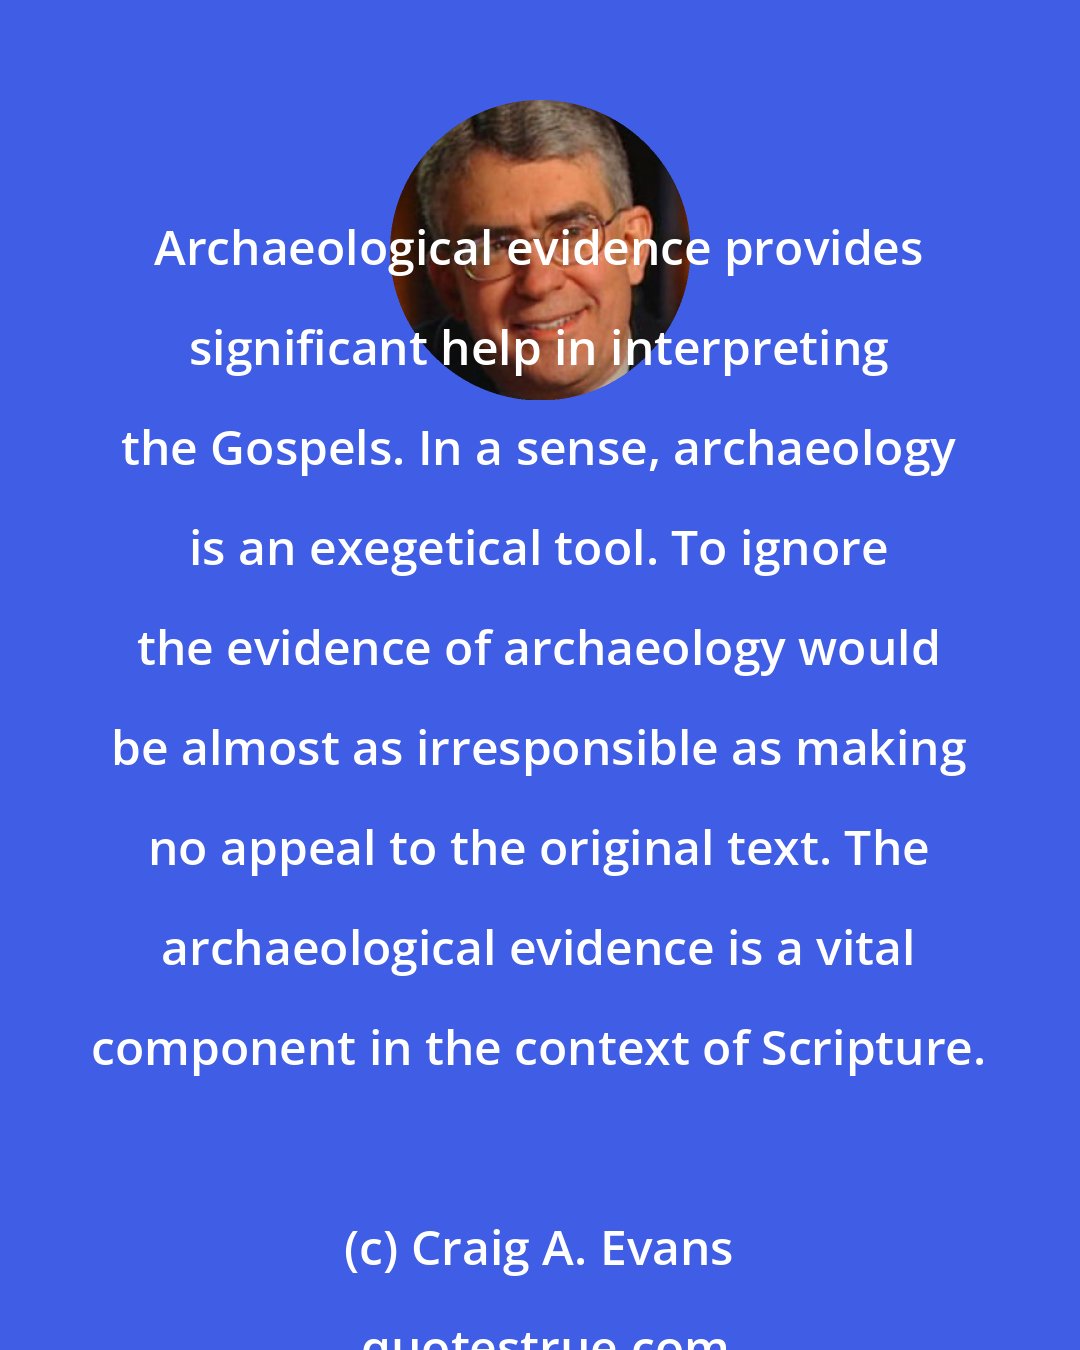 Craig A. Evans: Archaeological evidence provides significant help in interpreting the Gospels. In a sense, archaeology is an exegetical tool. To ignore the evidence of archaeology would be almost as irresponsible as making no appeal to the original text. The archaeological evidence is a vital component in the context of Scripture.